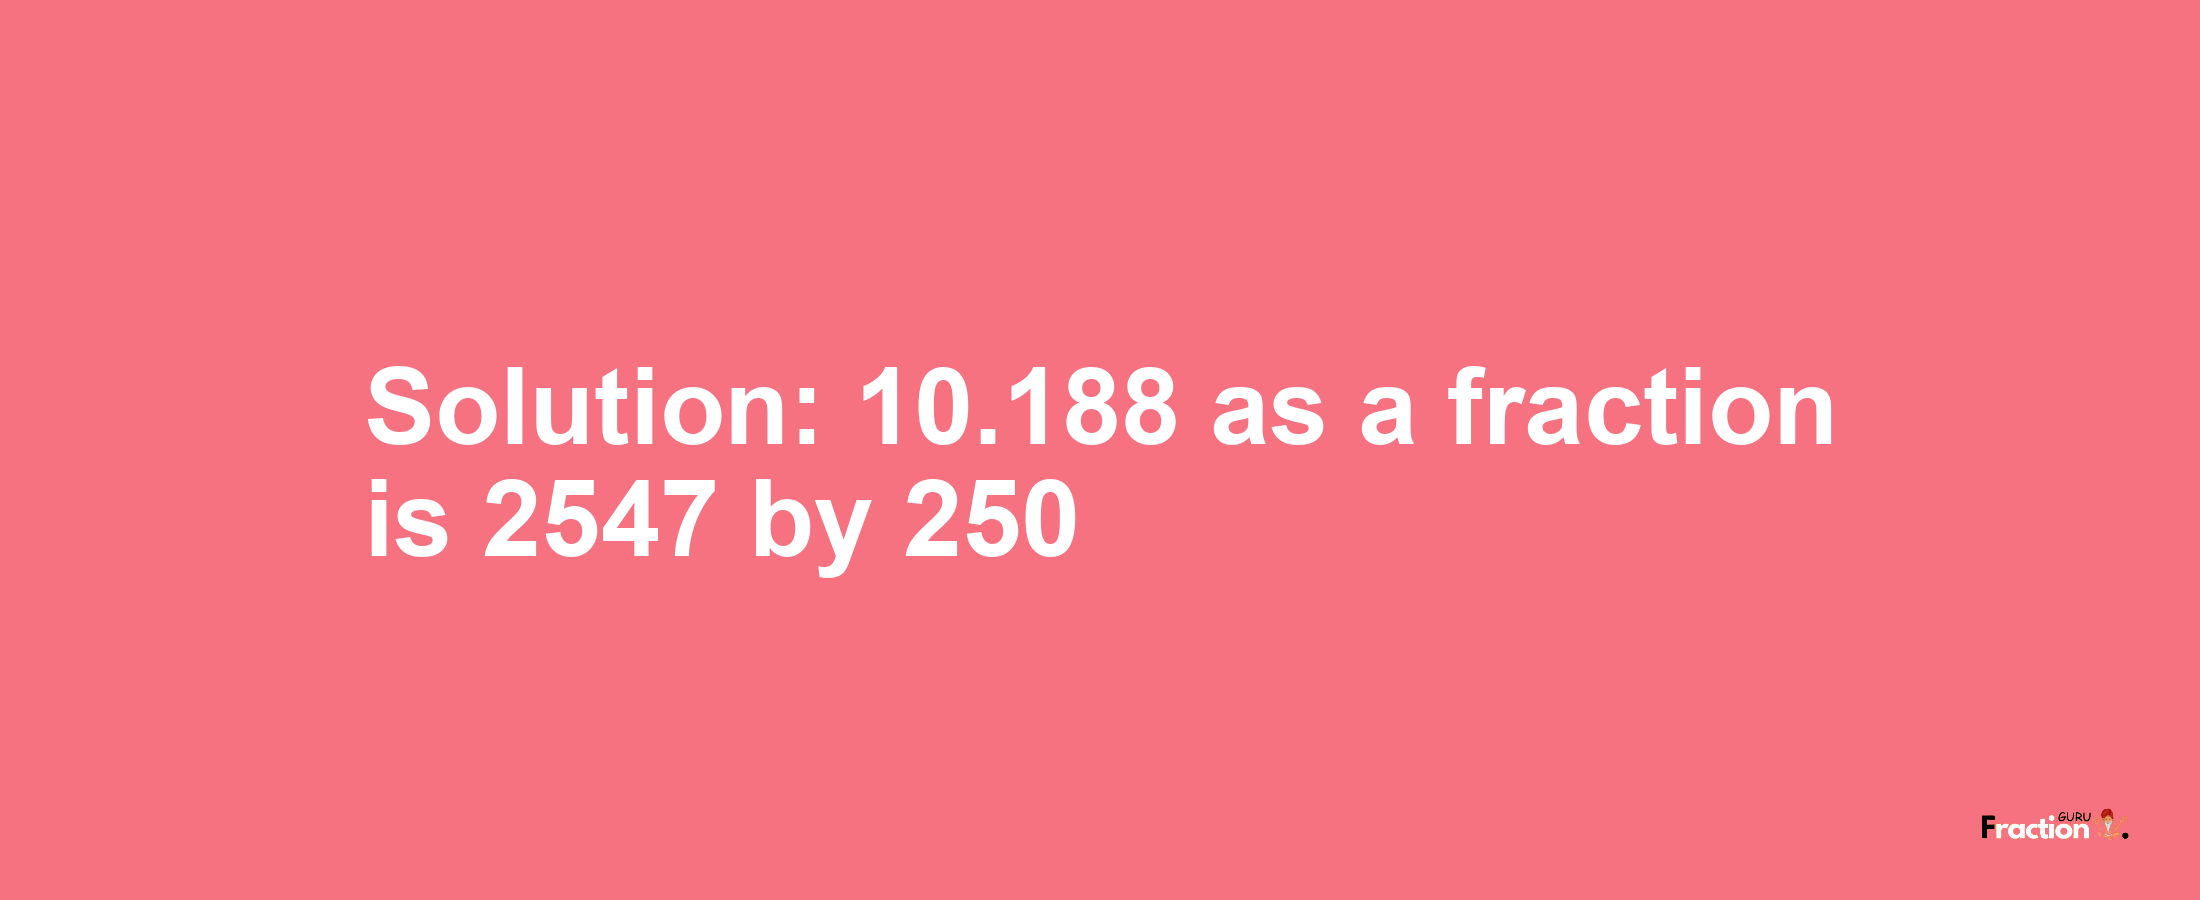 Solution:10.188 as a fraction is 2547/250